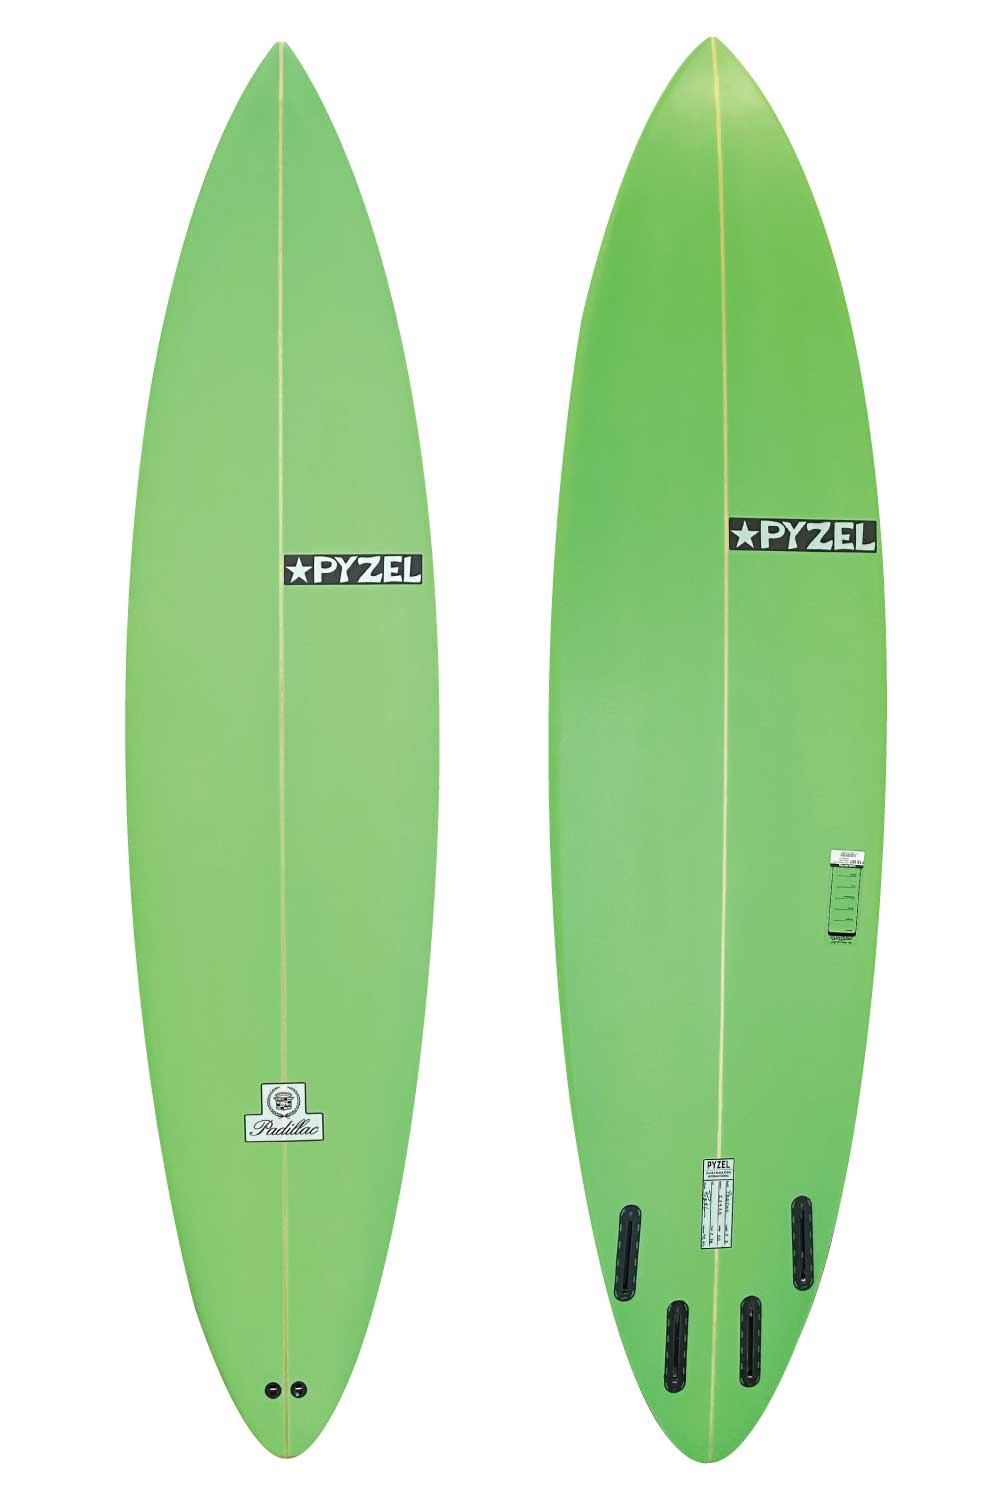 Pyzel Padillac Step Up Surfboard - With Spray